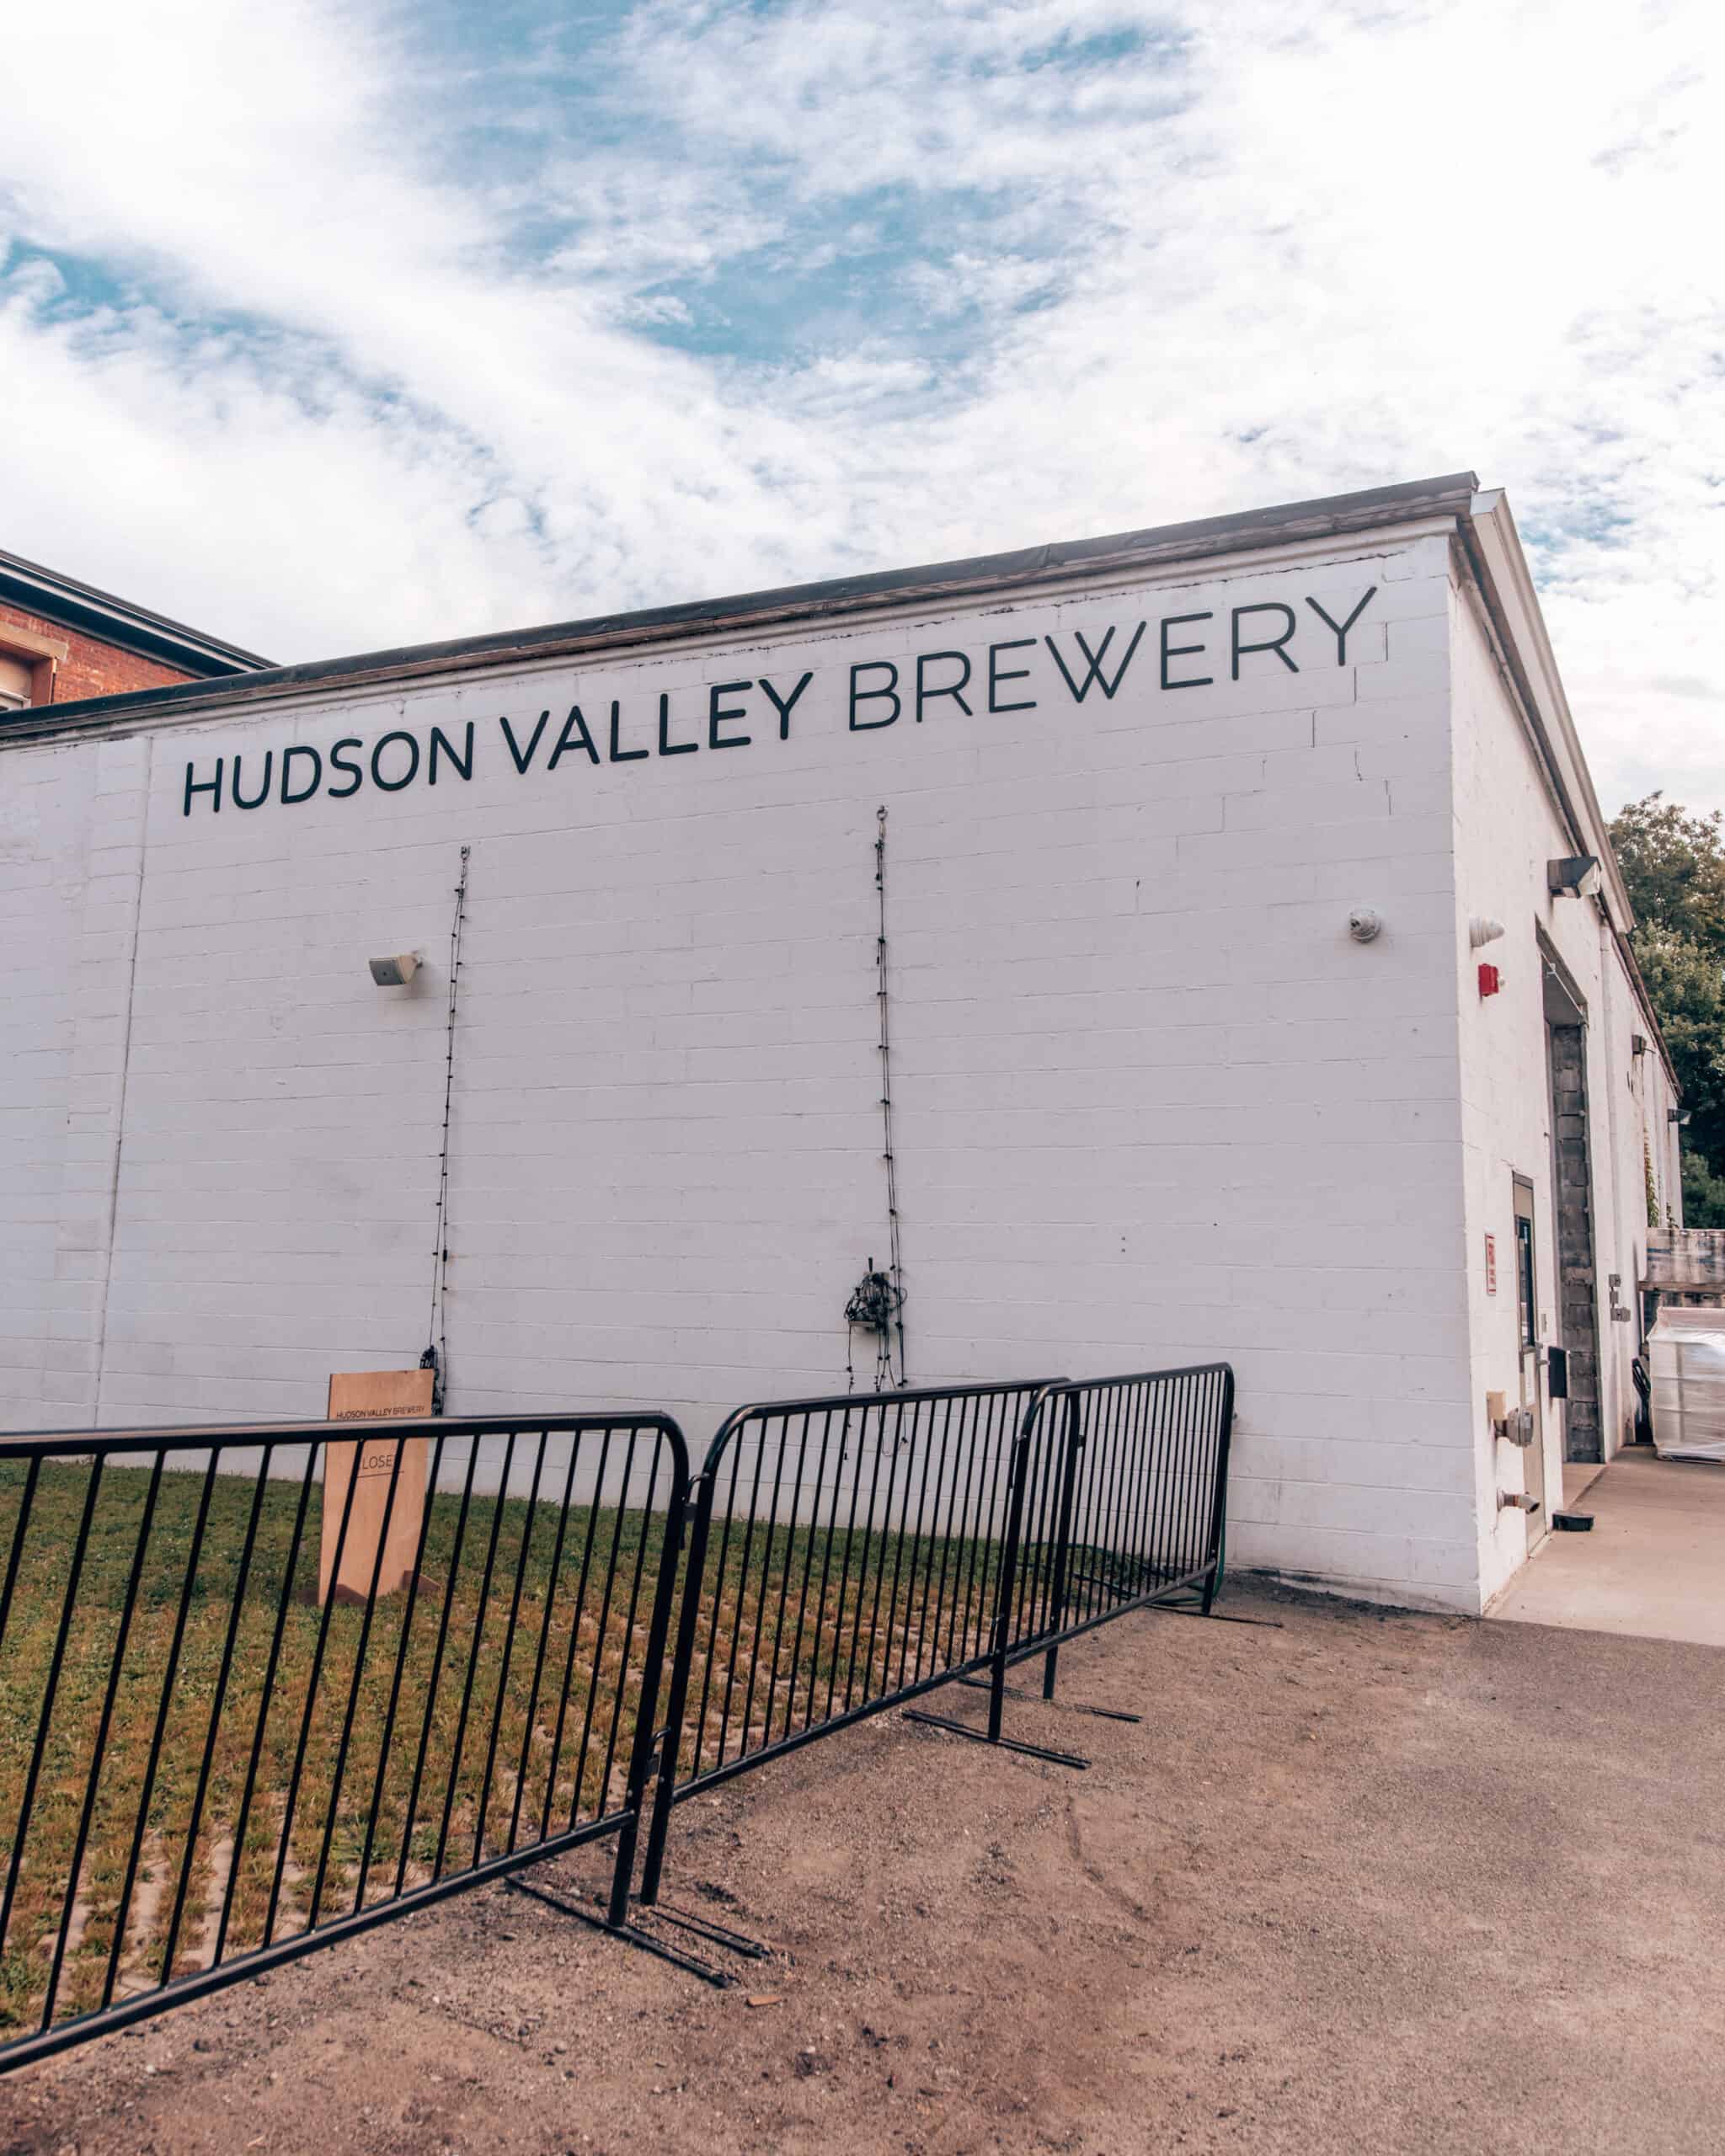 Breweries in the Hudson Valley